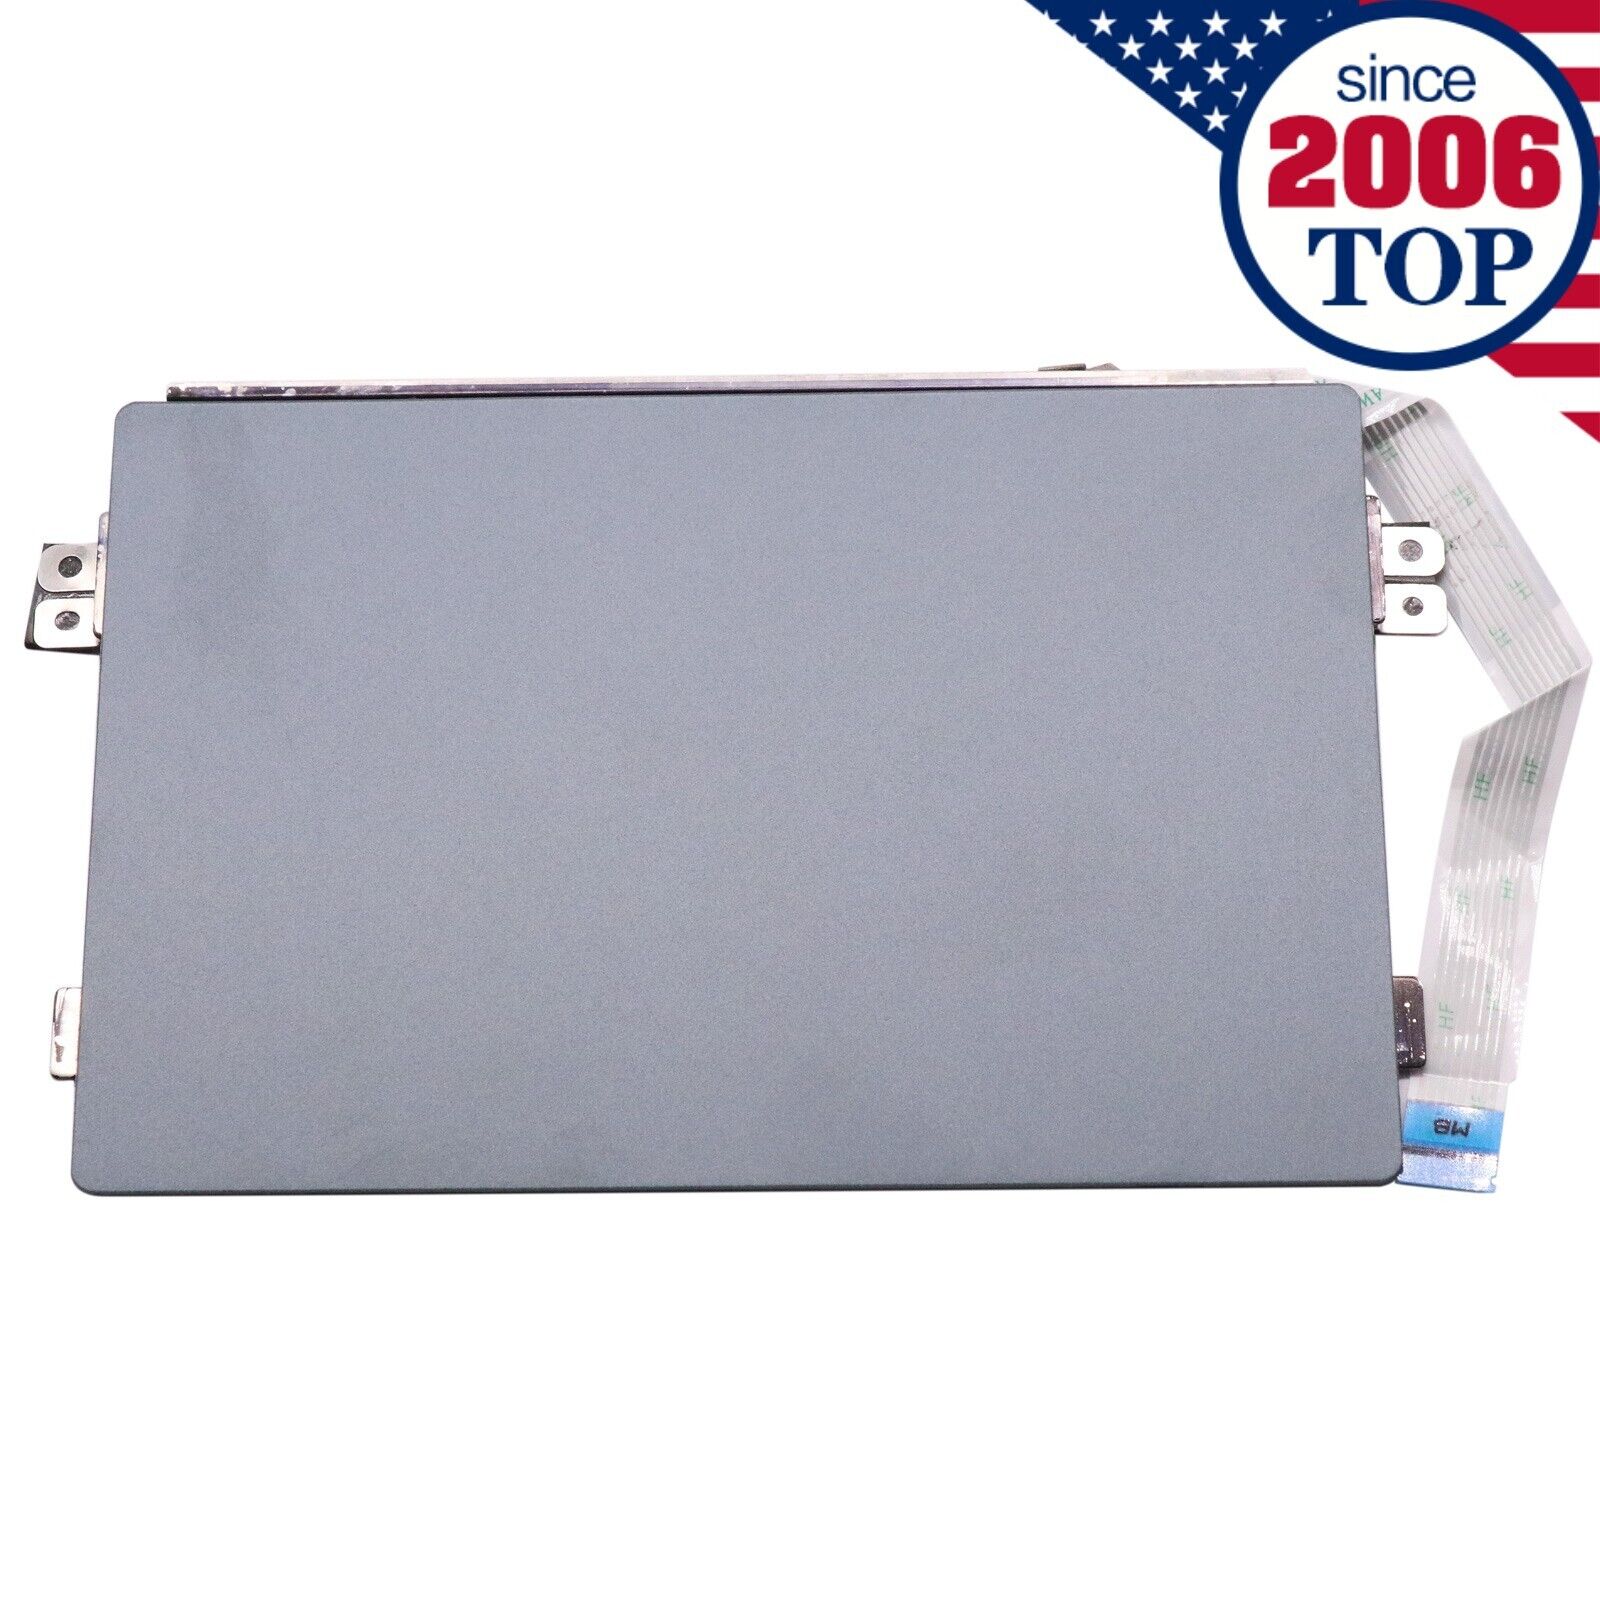 NEW Touchpad Module for Dell Inspiron 16Plus 7610 N9M9F 0N9M9F W/Cable